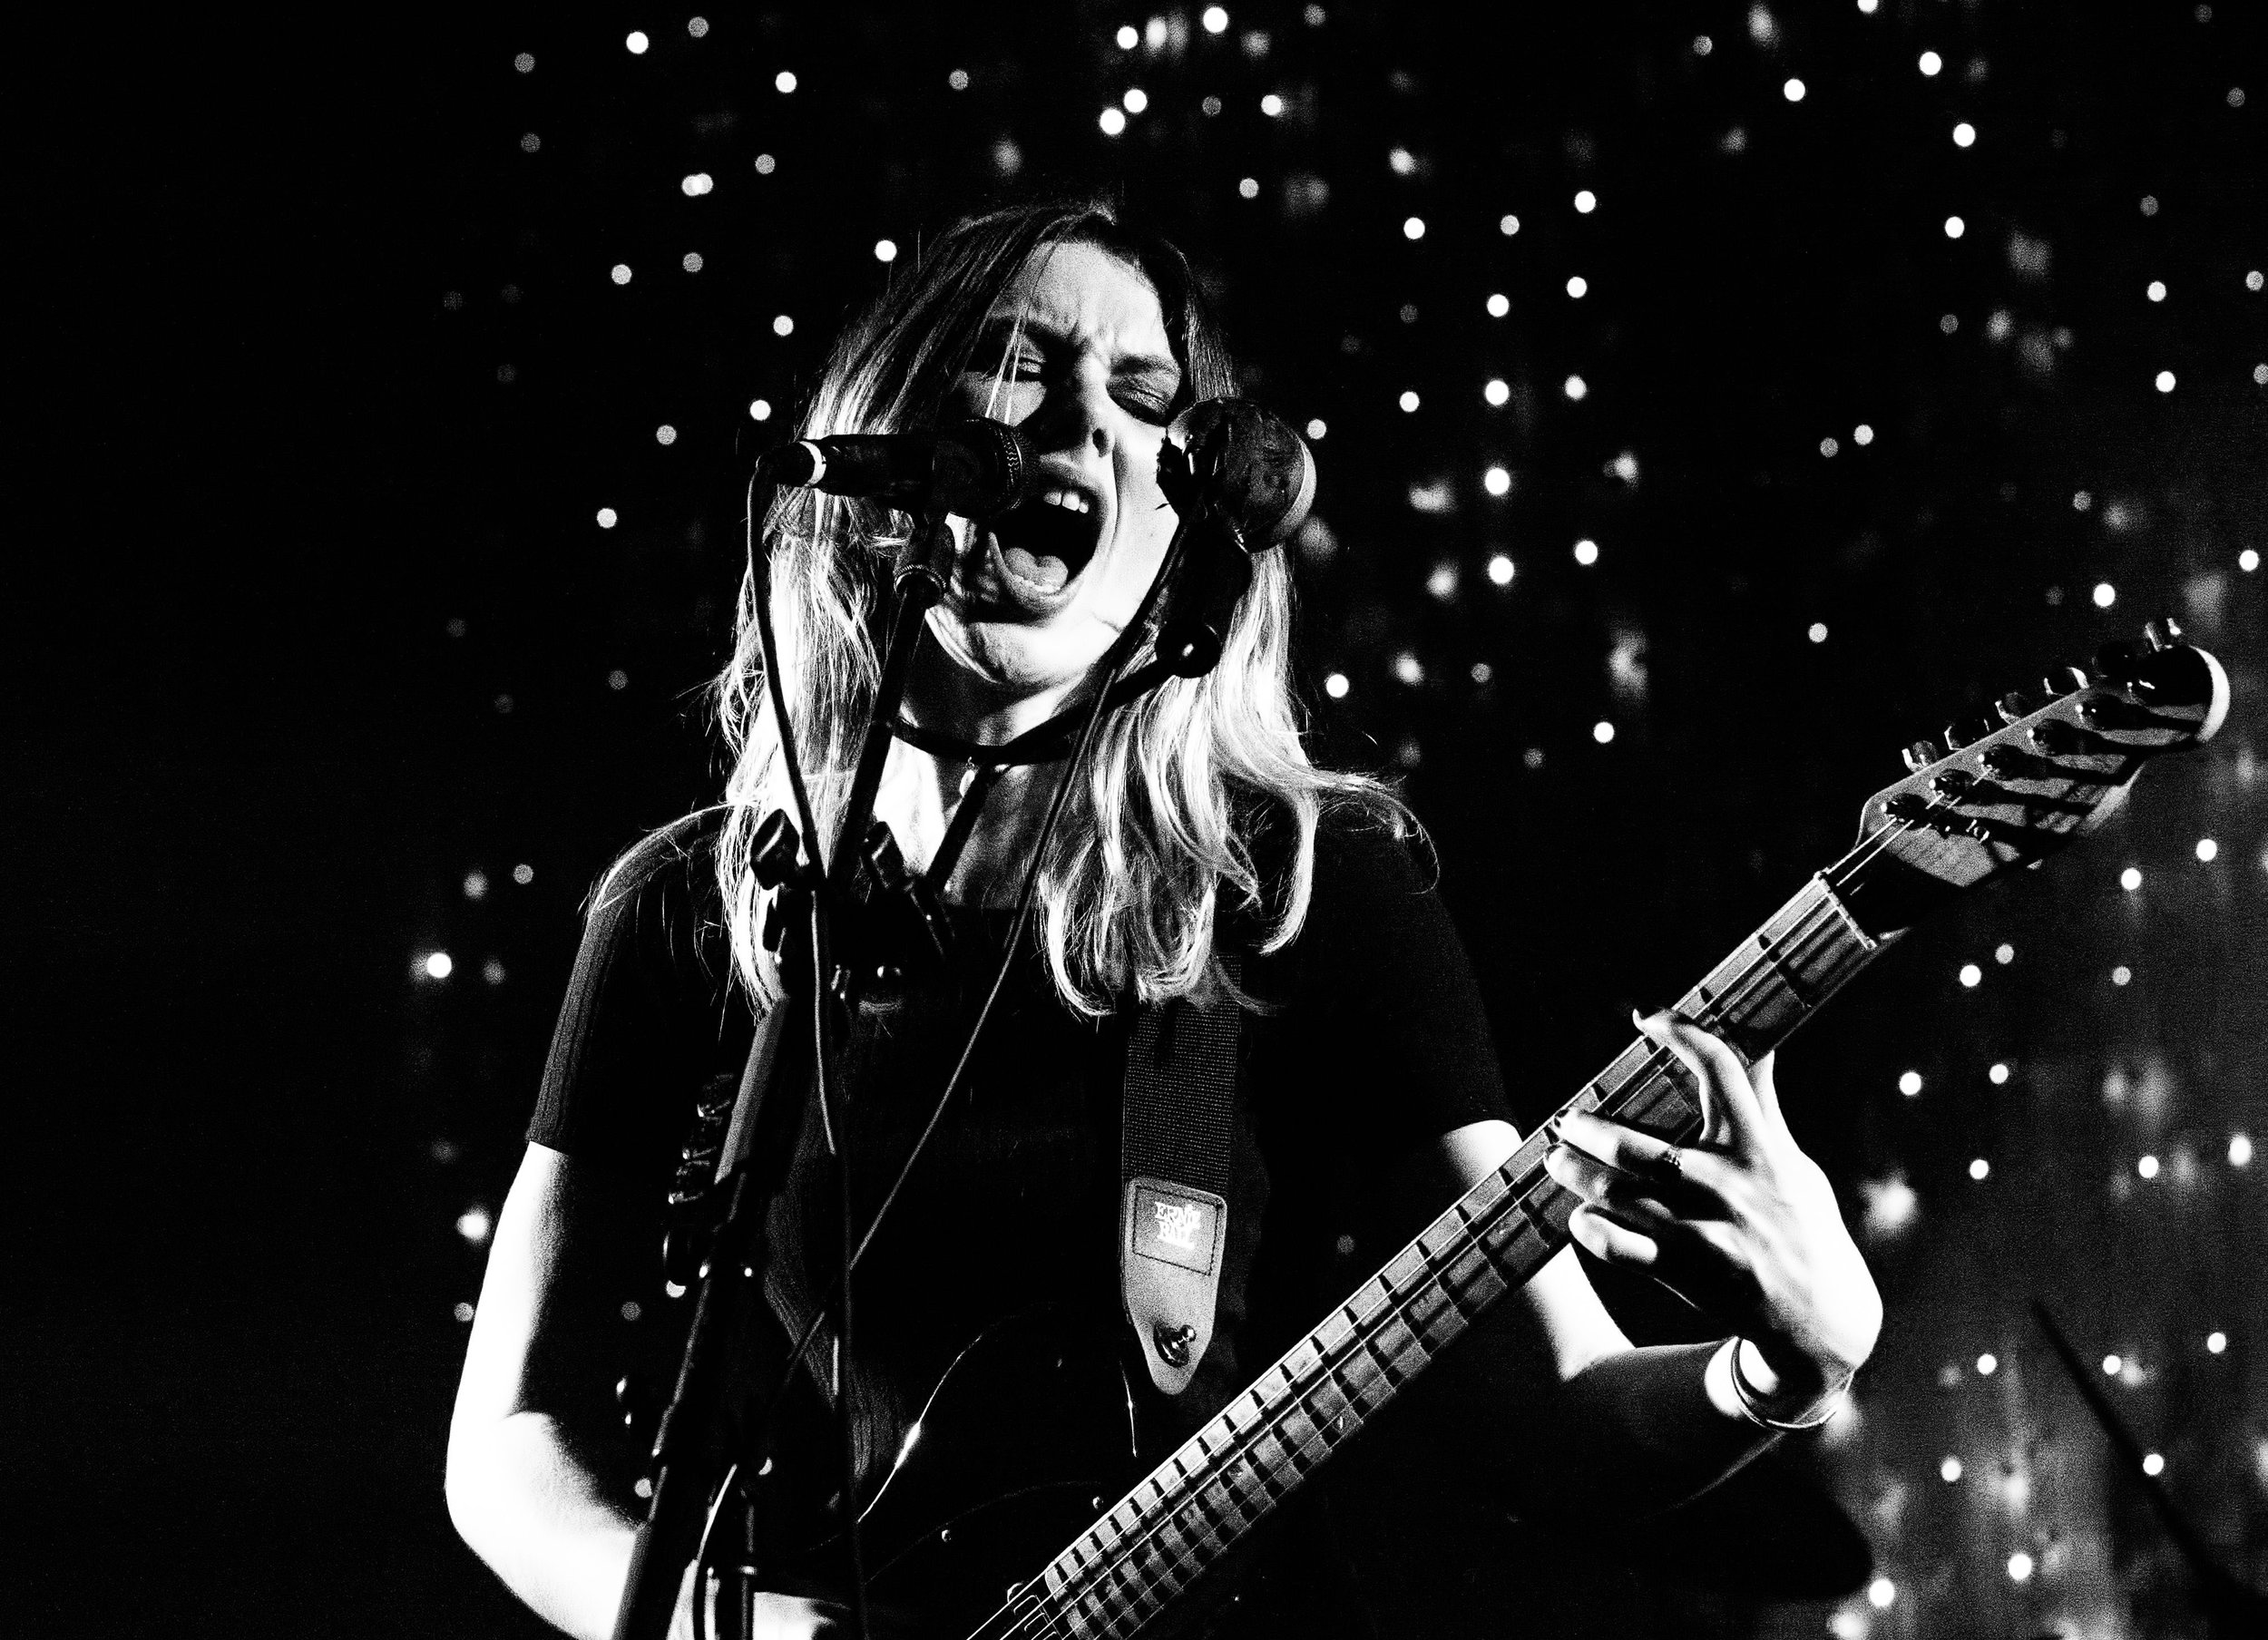 Ellie Rowsell of Wolf Alice